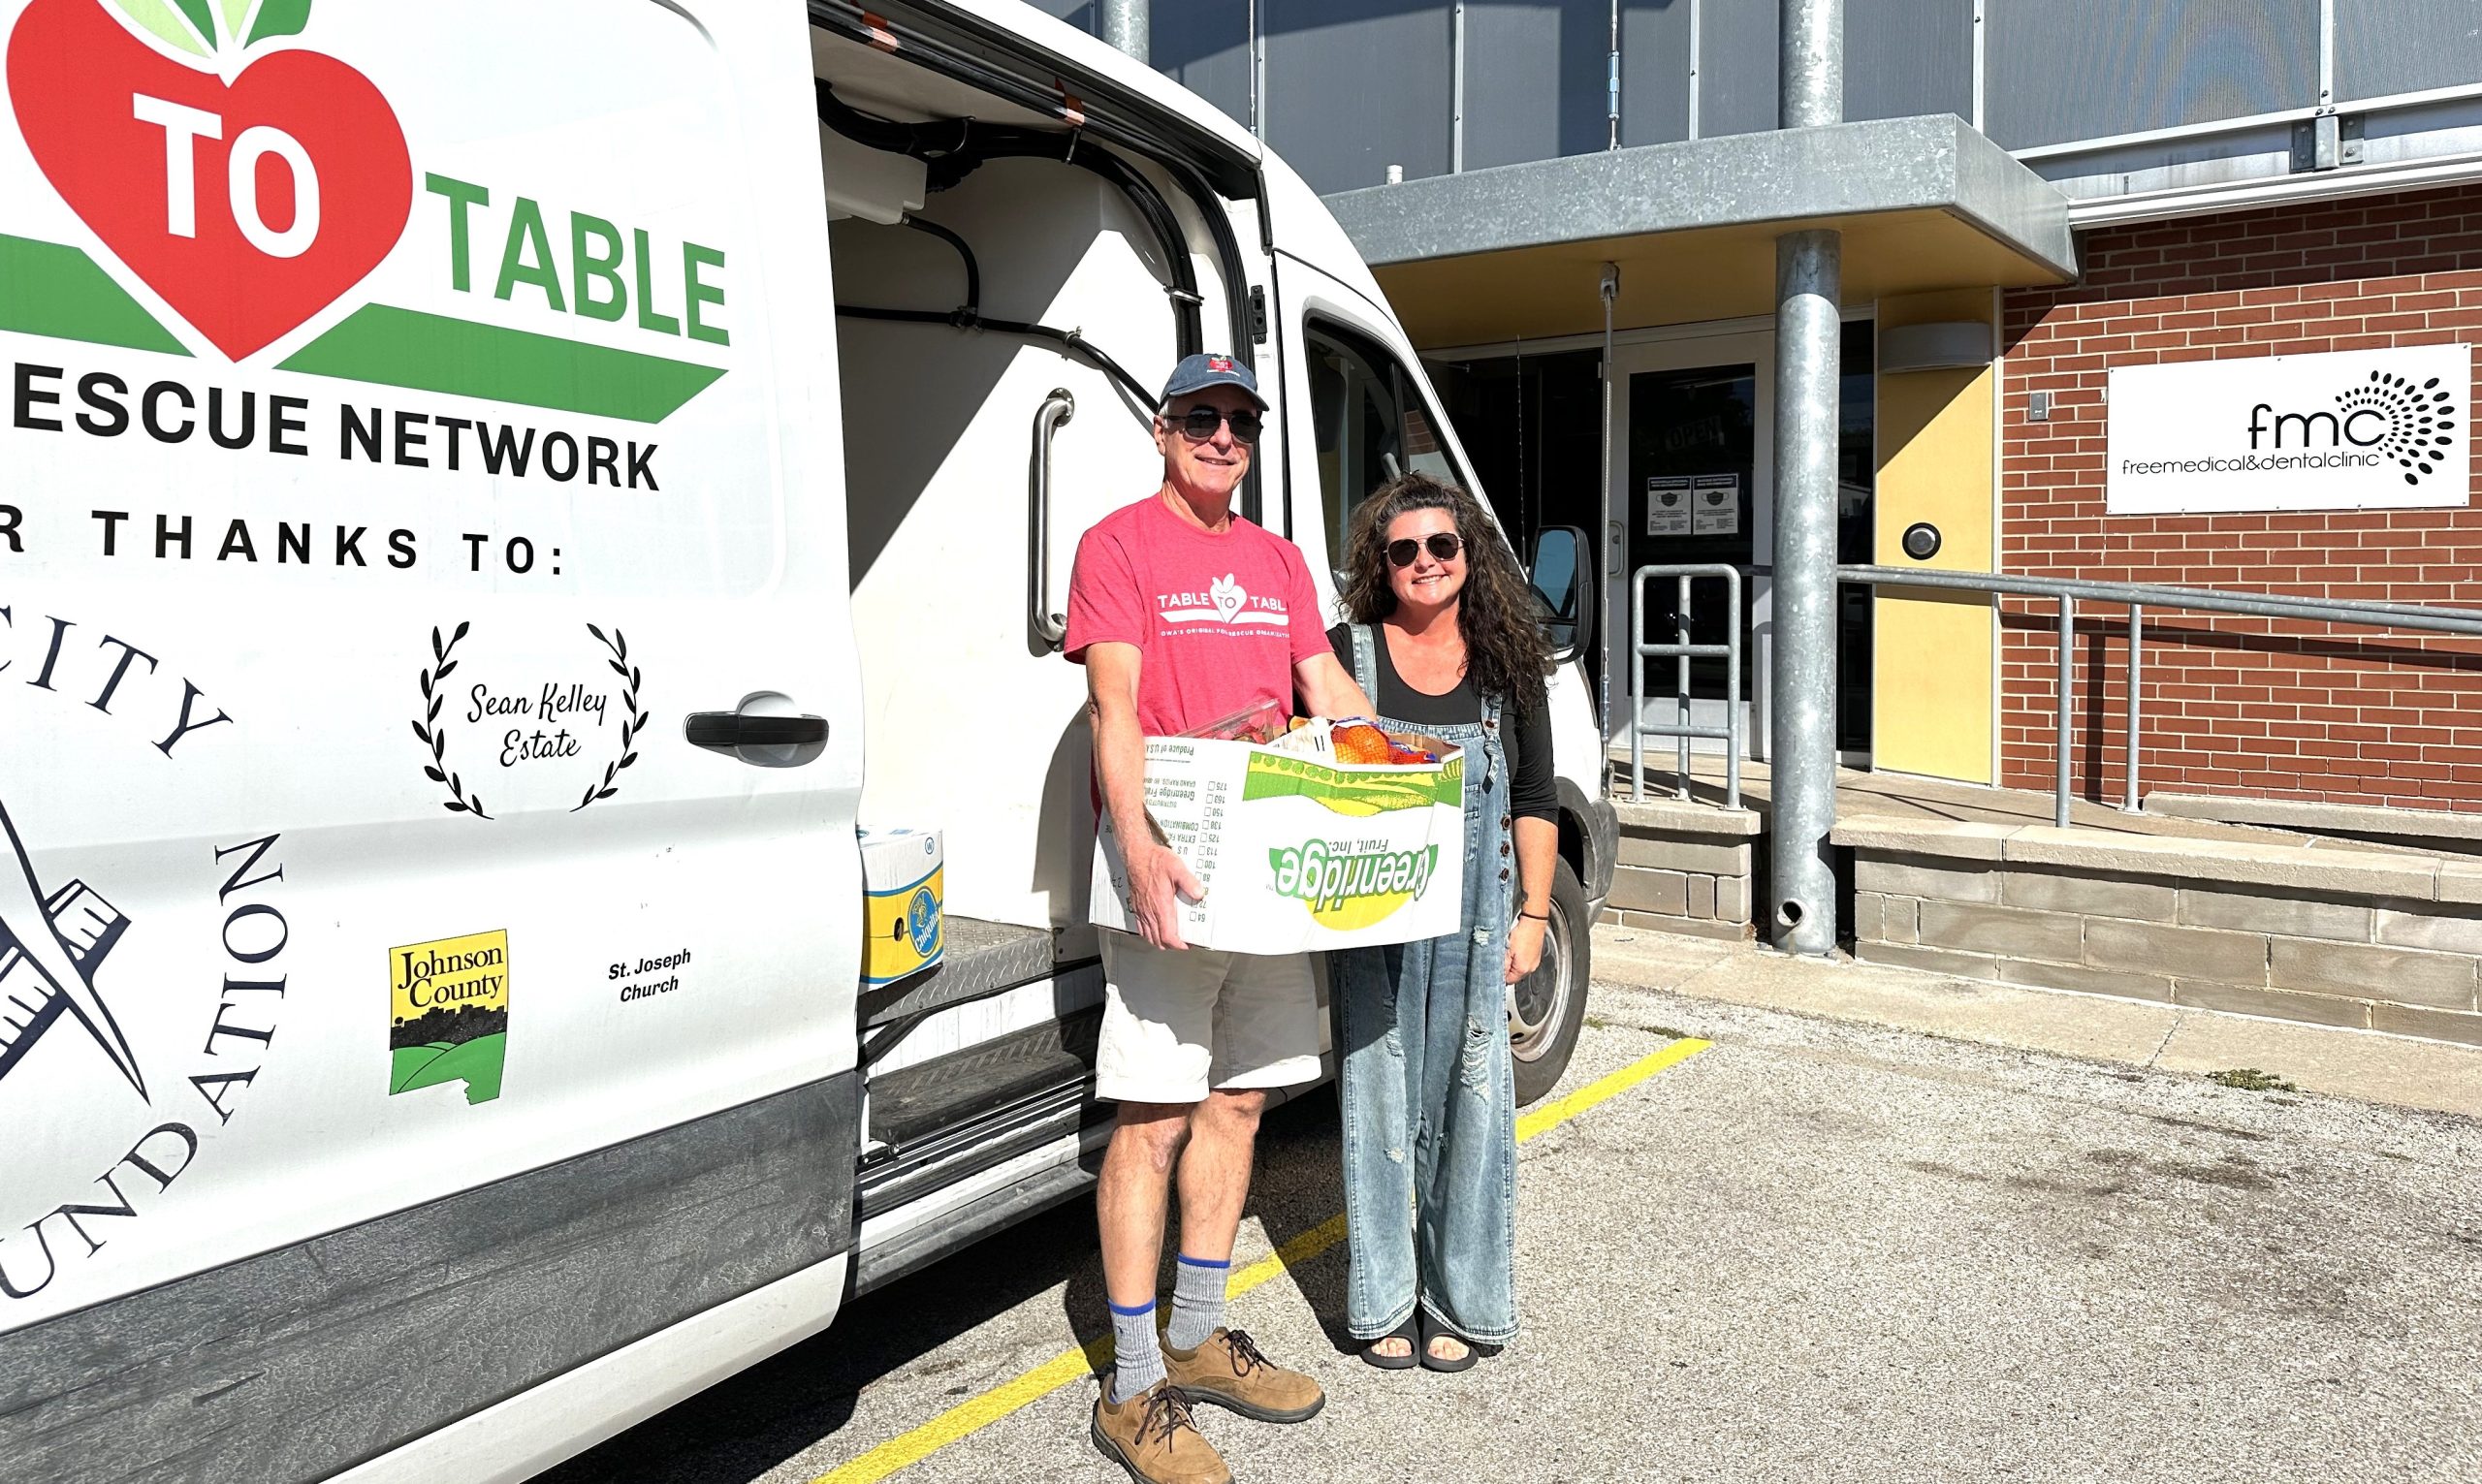 A T2T volunteer, holding a box of vegetables, and a staff member with Free Medical Clinic pose with the T2T van in front of the Free Medical Clinic building.